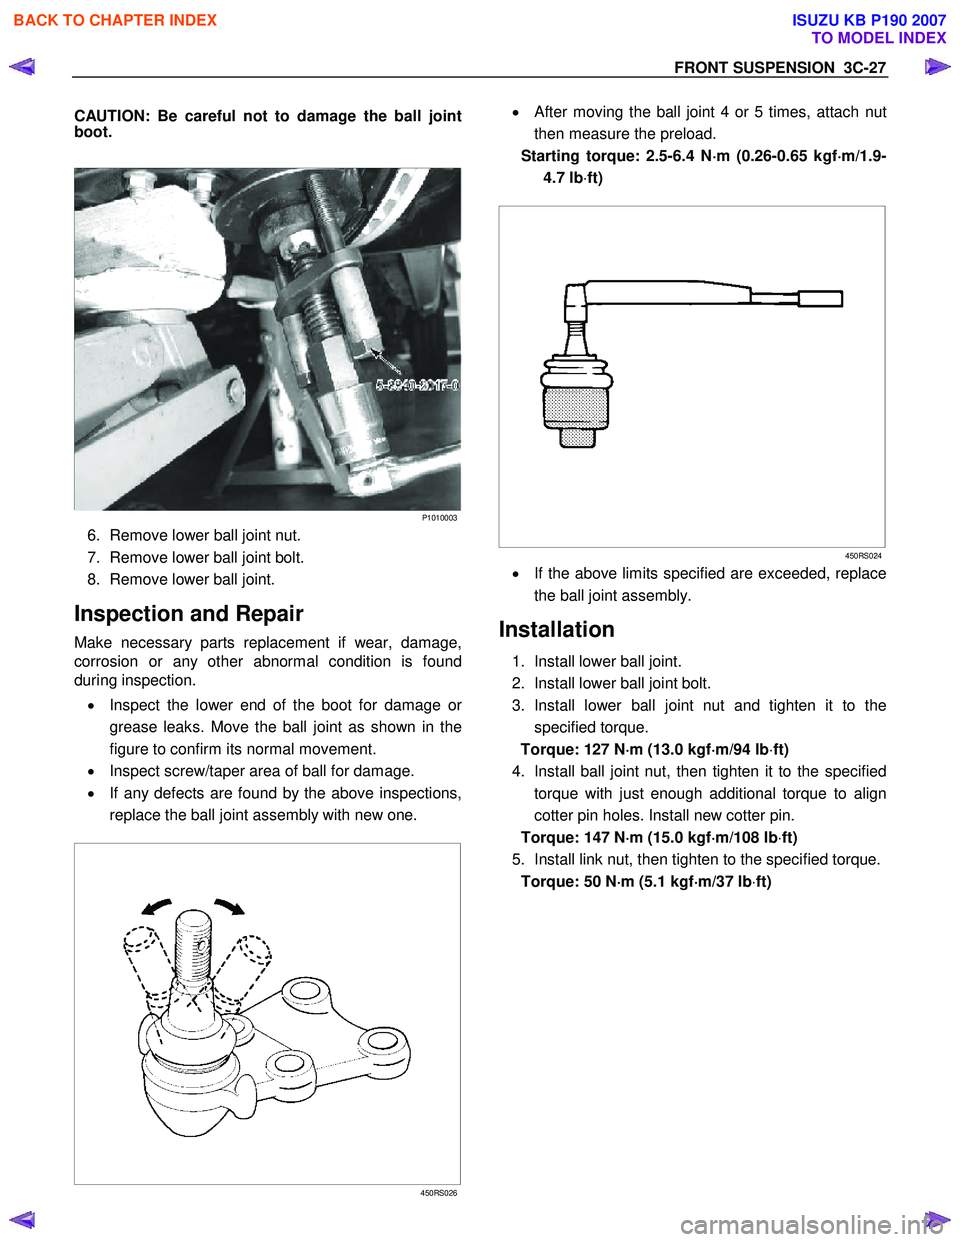 ISUZU KB P190 2007  Workshop Repair Manual FRONT SUSPENSION  3C-27 
CAUTION: Be careful not to damage the ball joint 
boot.  
  
 
P1010003
6.  Remove lower ball joint nut.  
7.  Remove lower ball joint bolt. 
8.  Remove lower ball joint. 
Ins